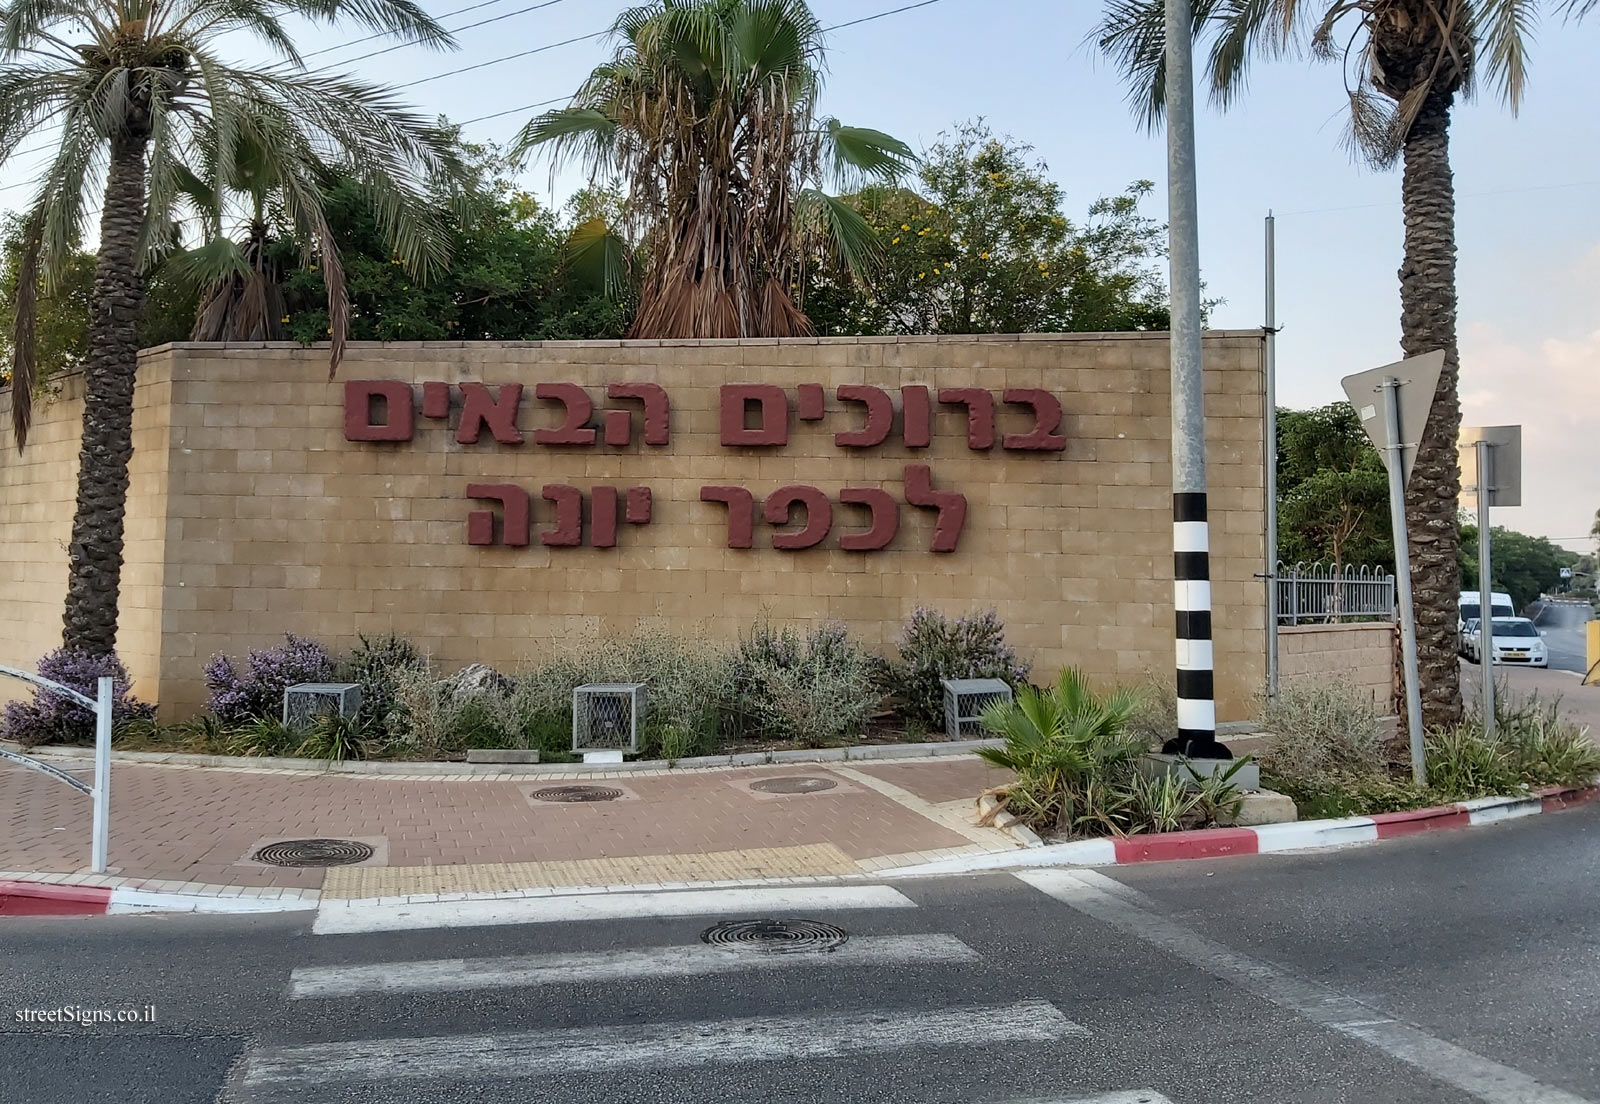 Kfar Yona - The entrance sign to the town